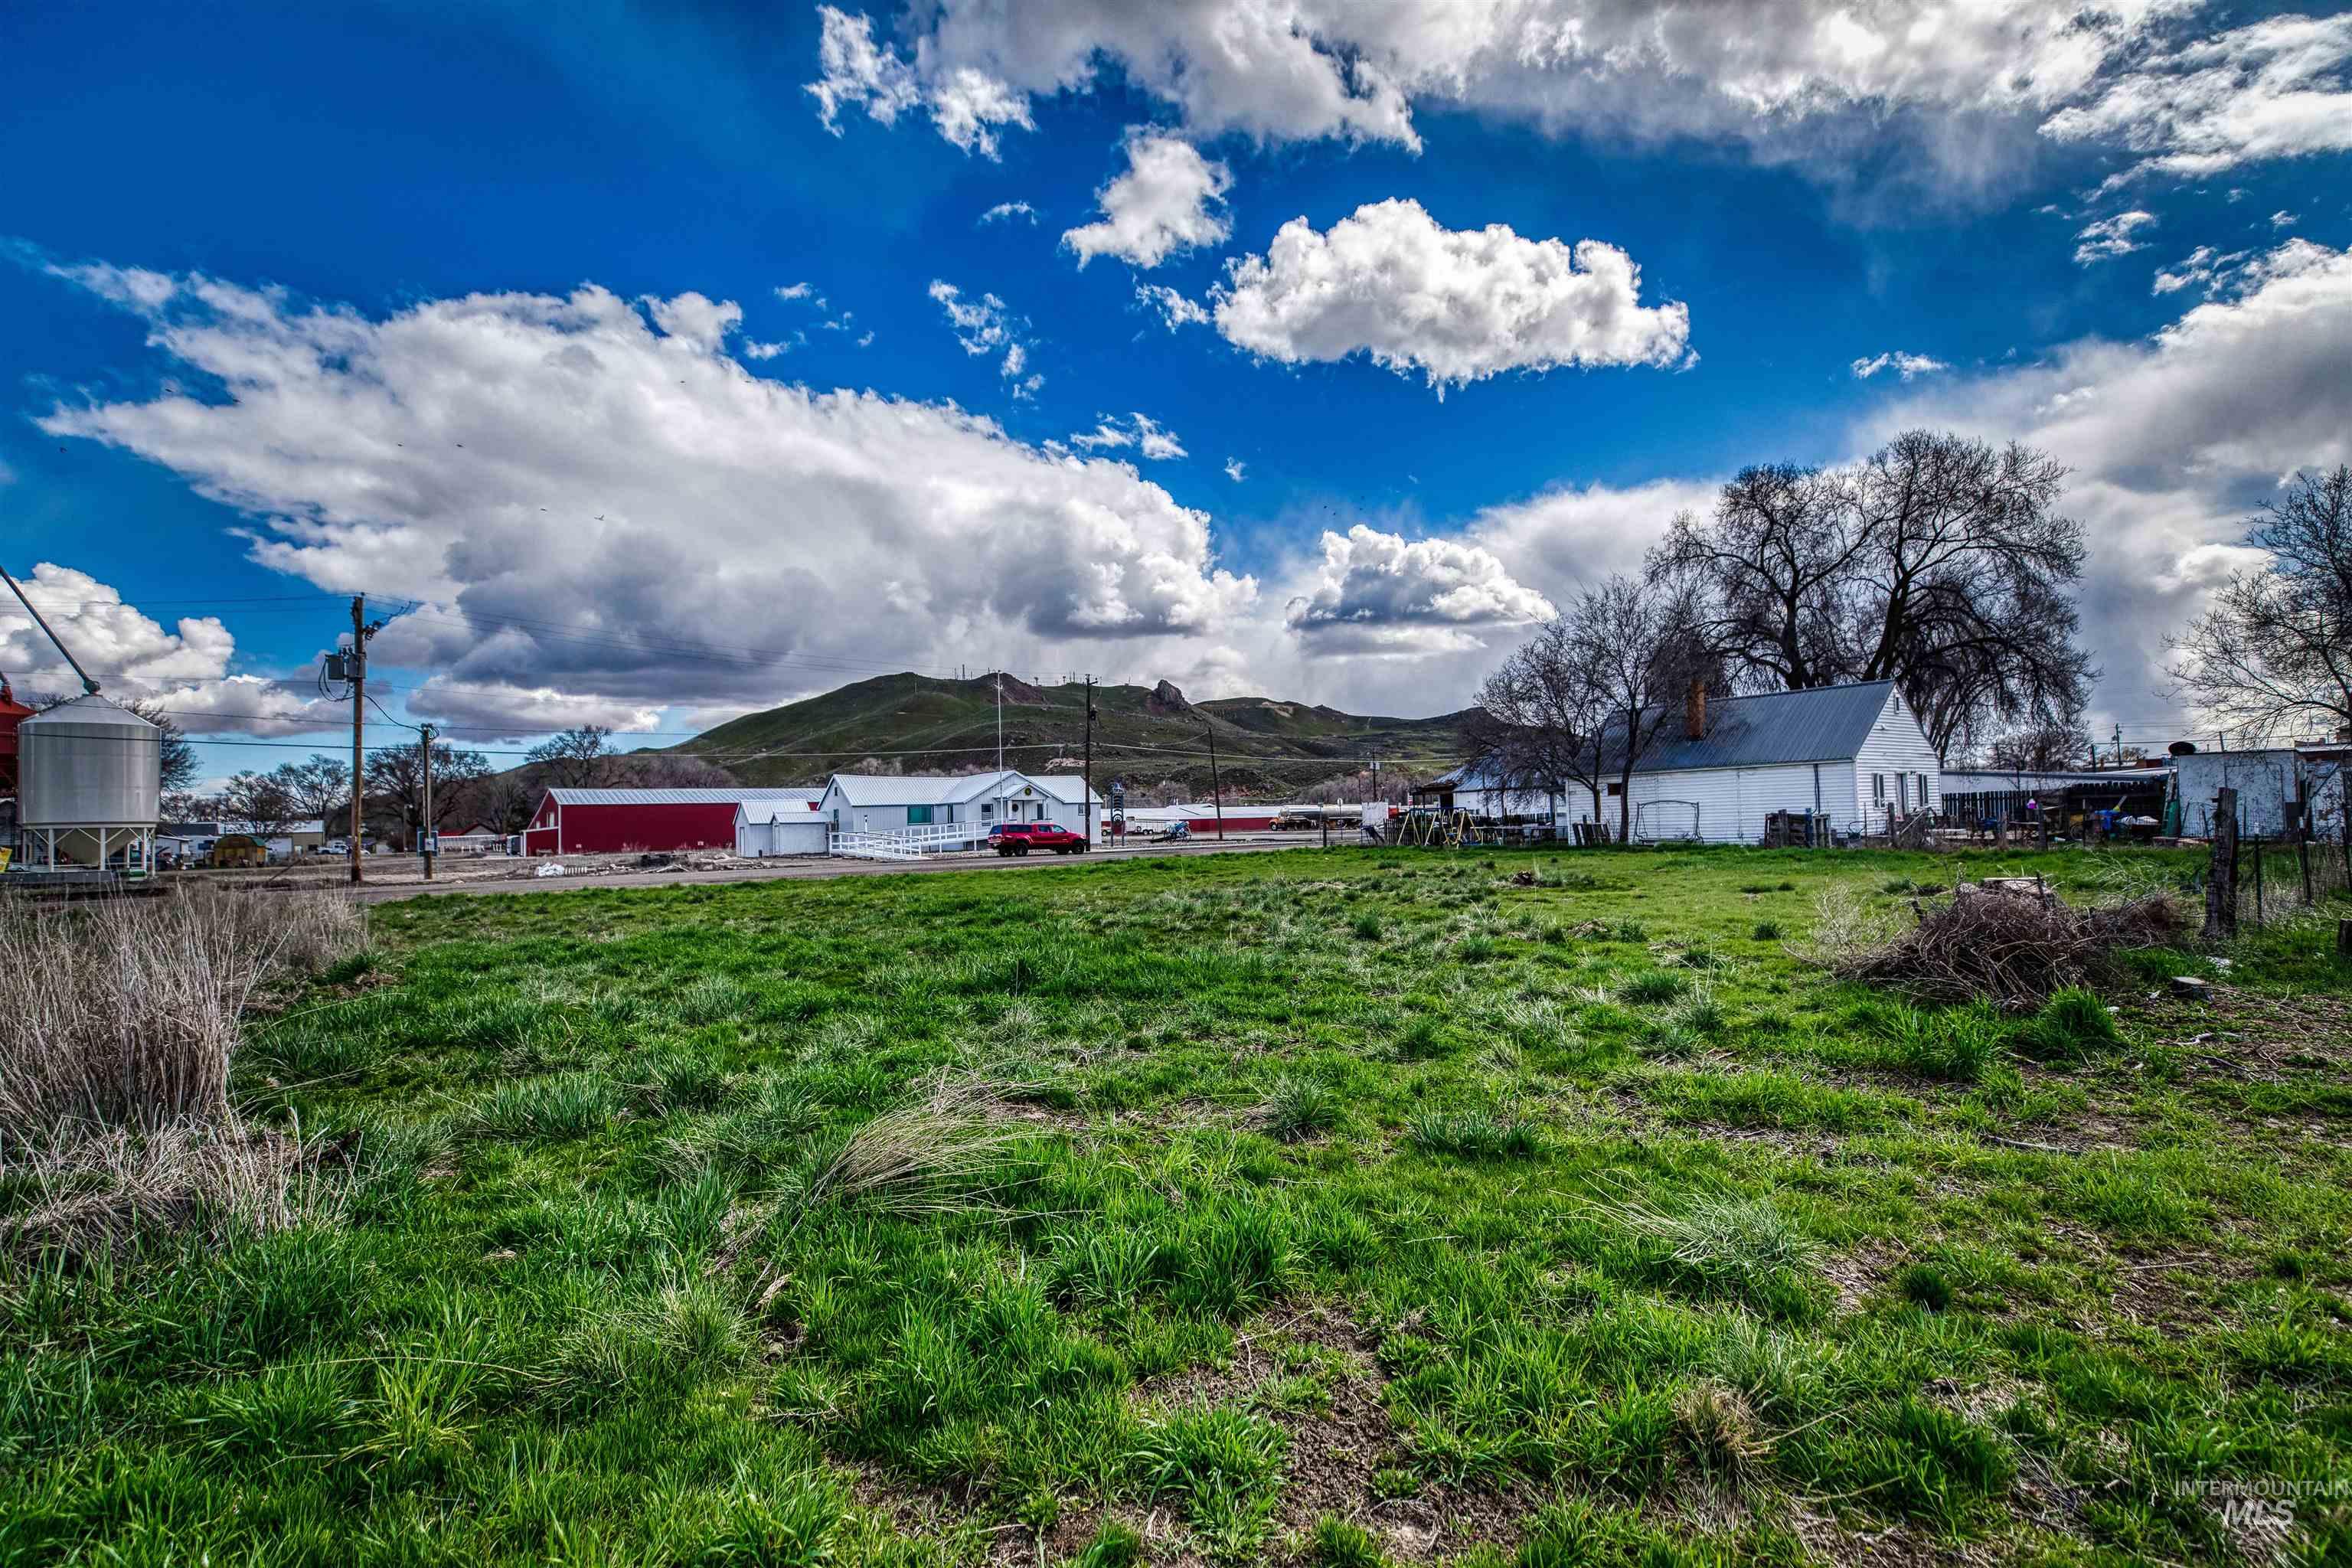 TBD Main St (tax lot 200), Vale, Oregon 97918, Land For Sale, Price $20,000,MLS 98904746